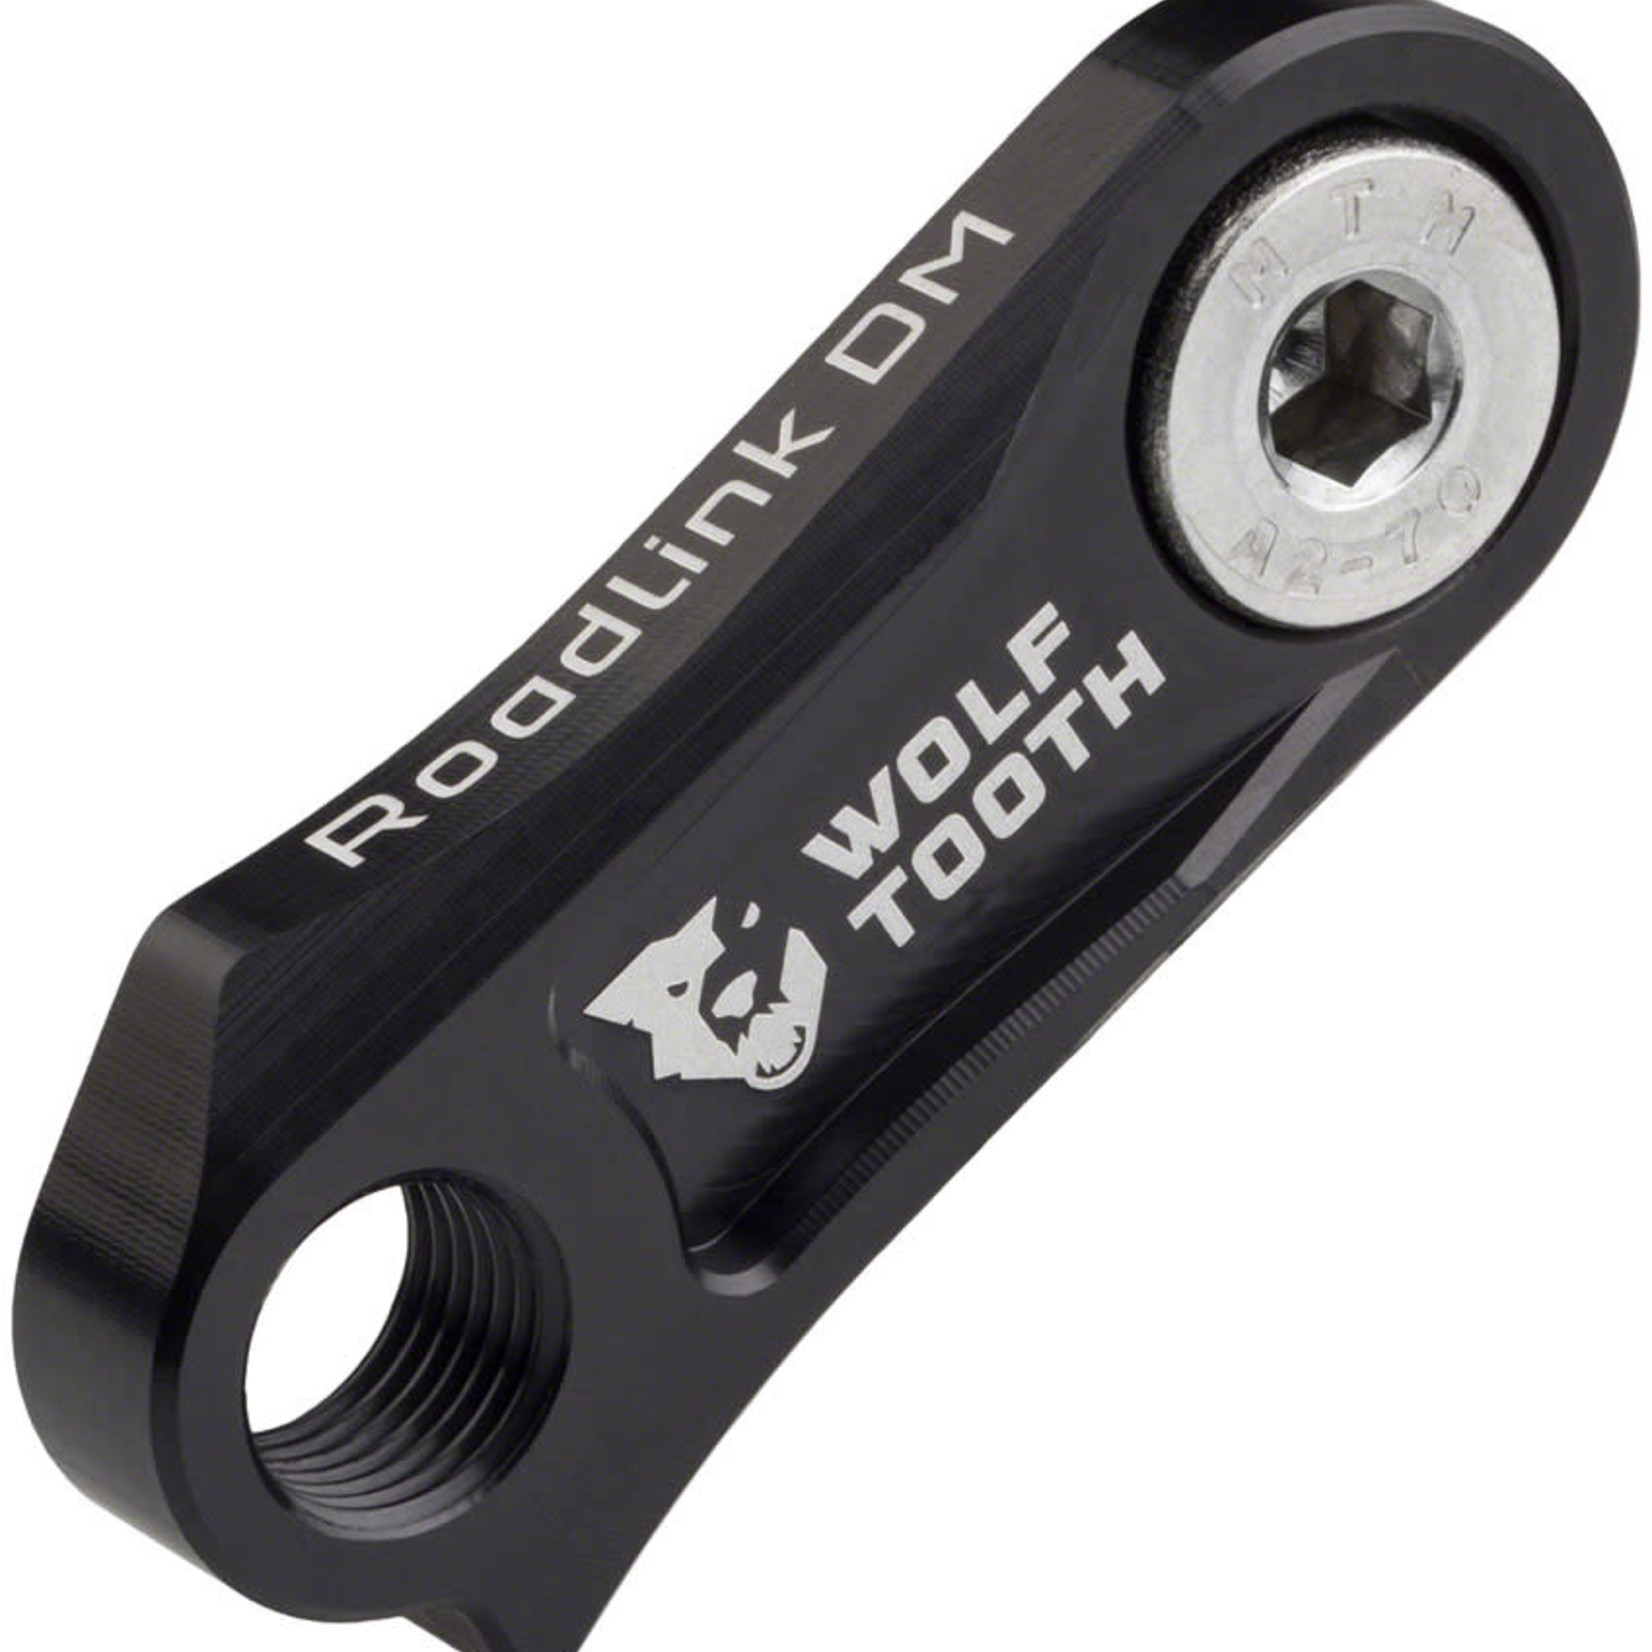 Wolf Tooth Wolf Tooth RoadLink Direct Mount for Shimano R8000/R9100 Rear Derailleurs when using Wide-Range Cassettes